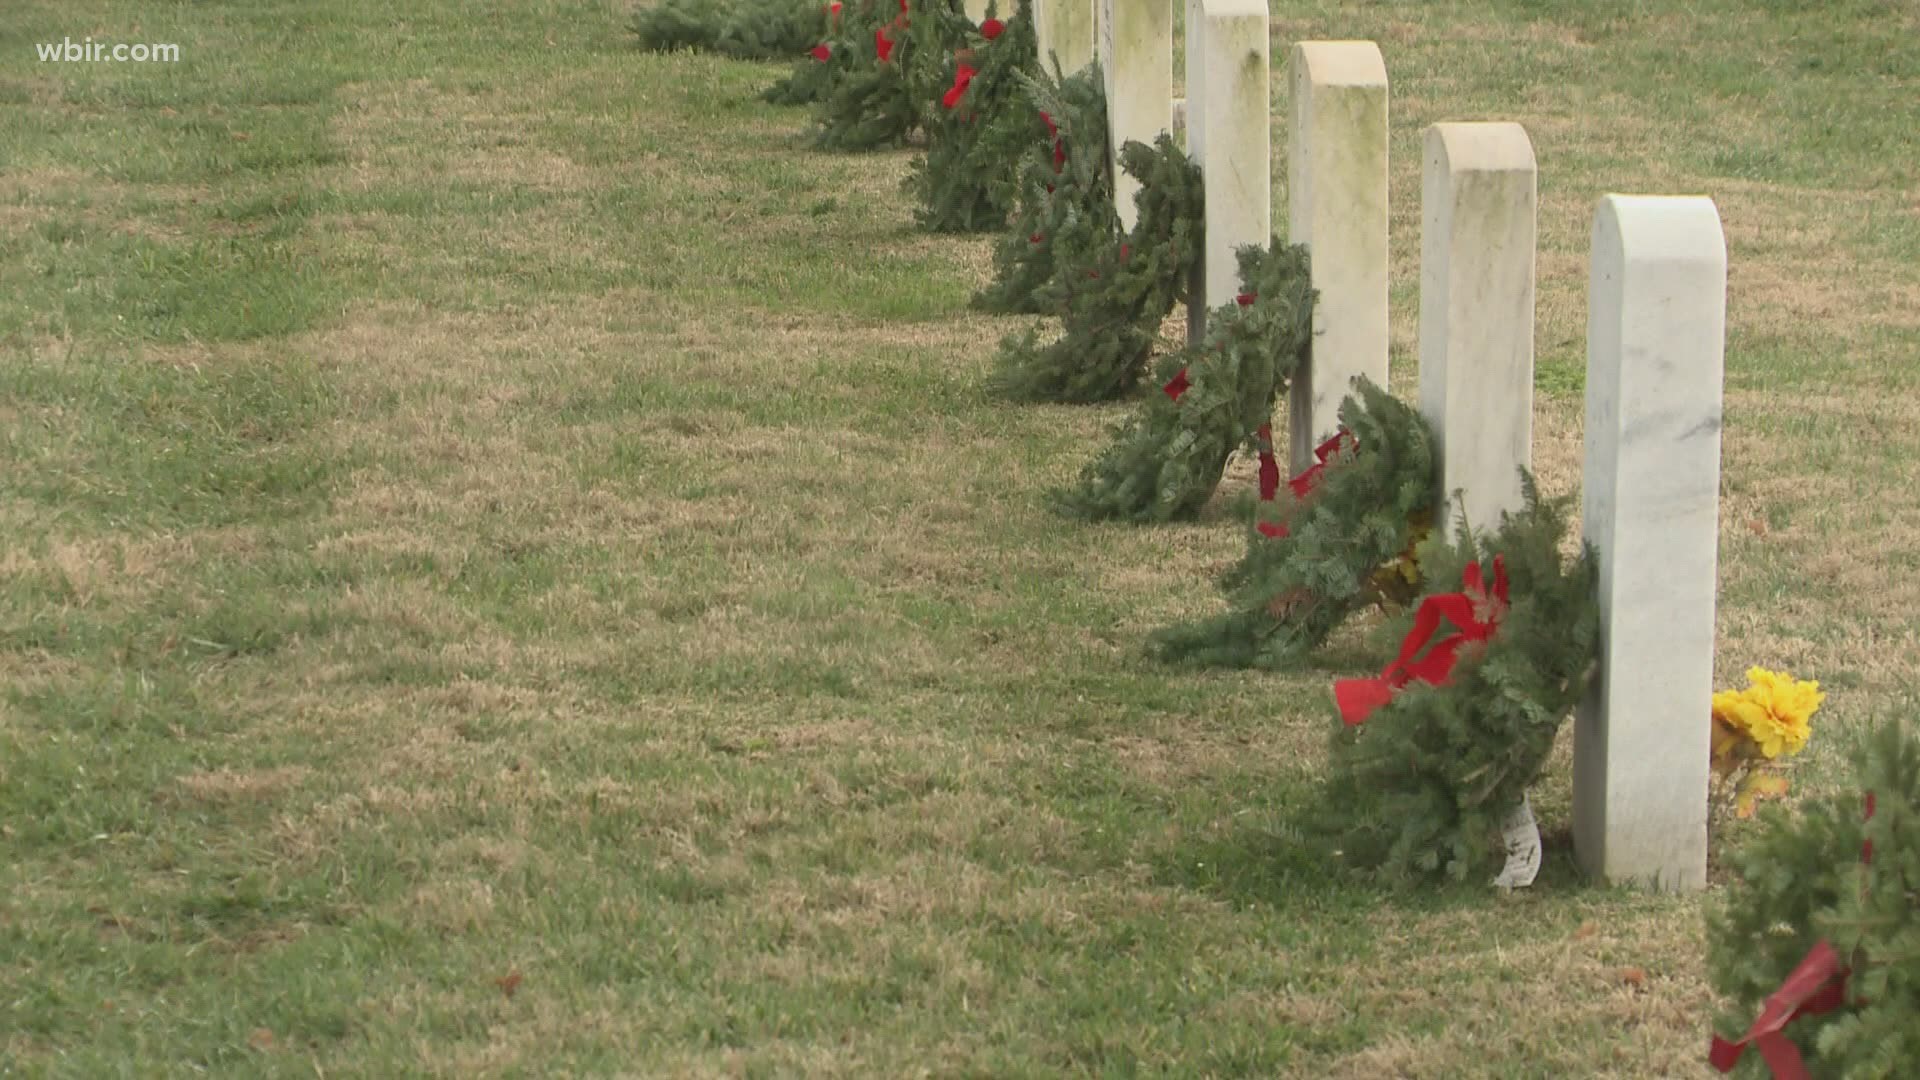 Officials with Wreaths Across America wants to honor veterans at Knox County graves with wreaths during the holiday season. They said it's funded through donations.